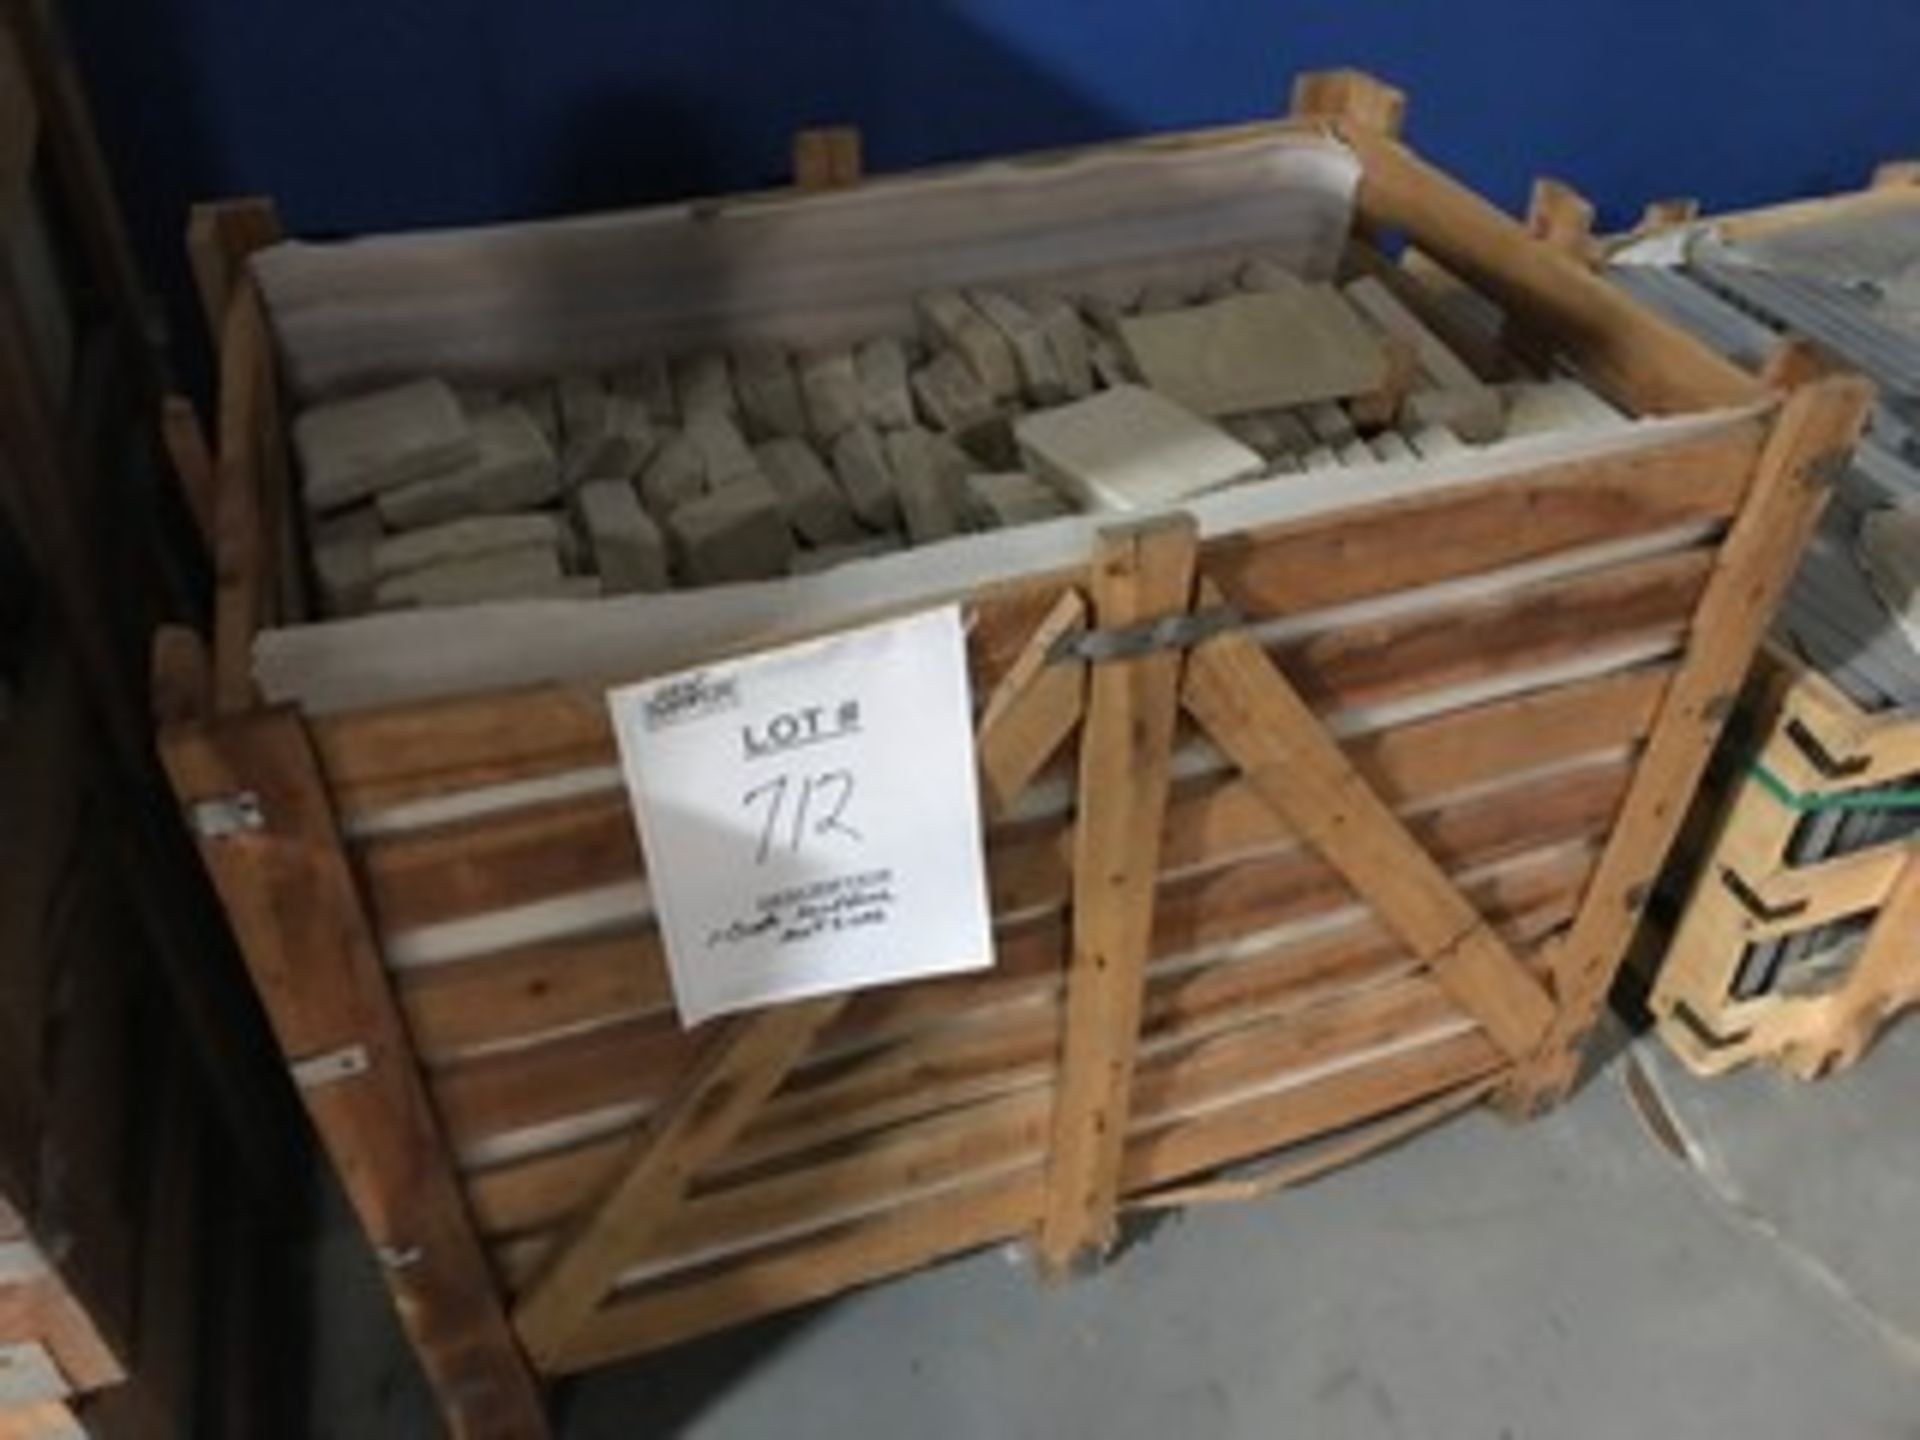 CRATE - INDIAN NATURAL STONE - SANDSTONE - ASSORTED SIZES (1 CRATE)